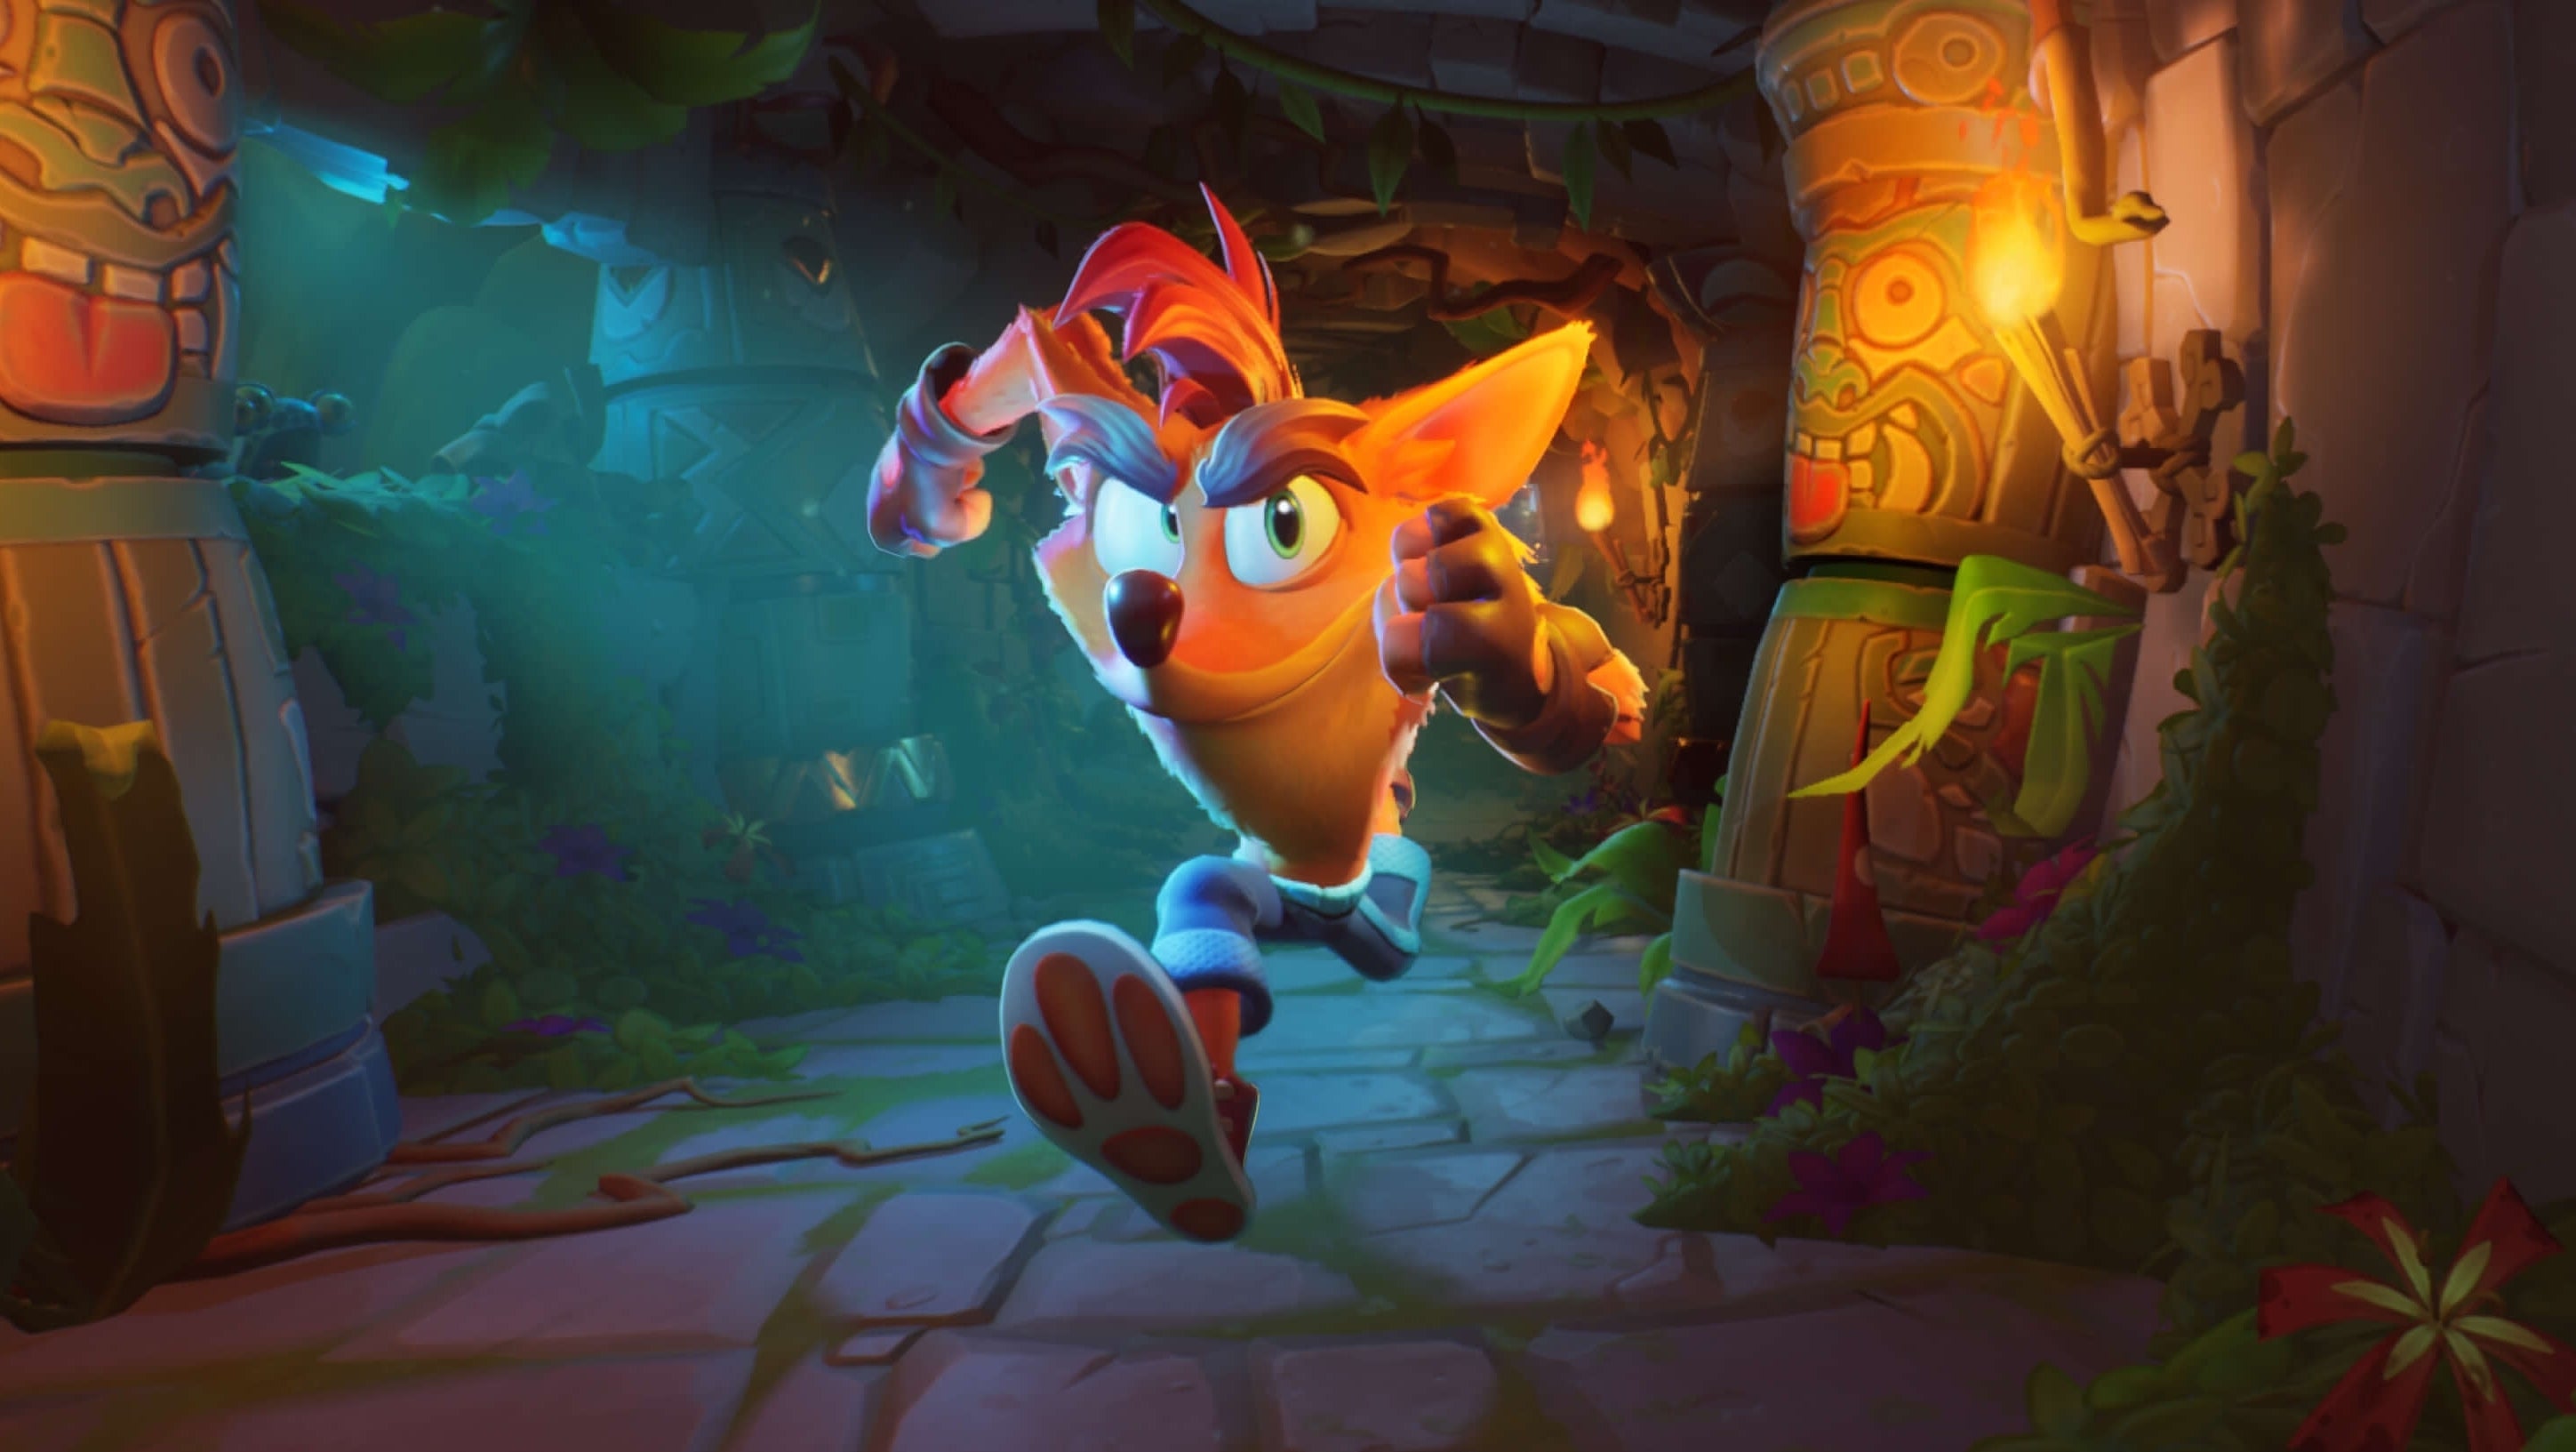 Image for Crash Bandicoot 4 is heading to PC later this month